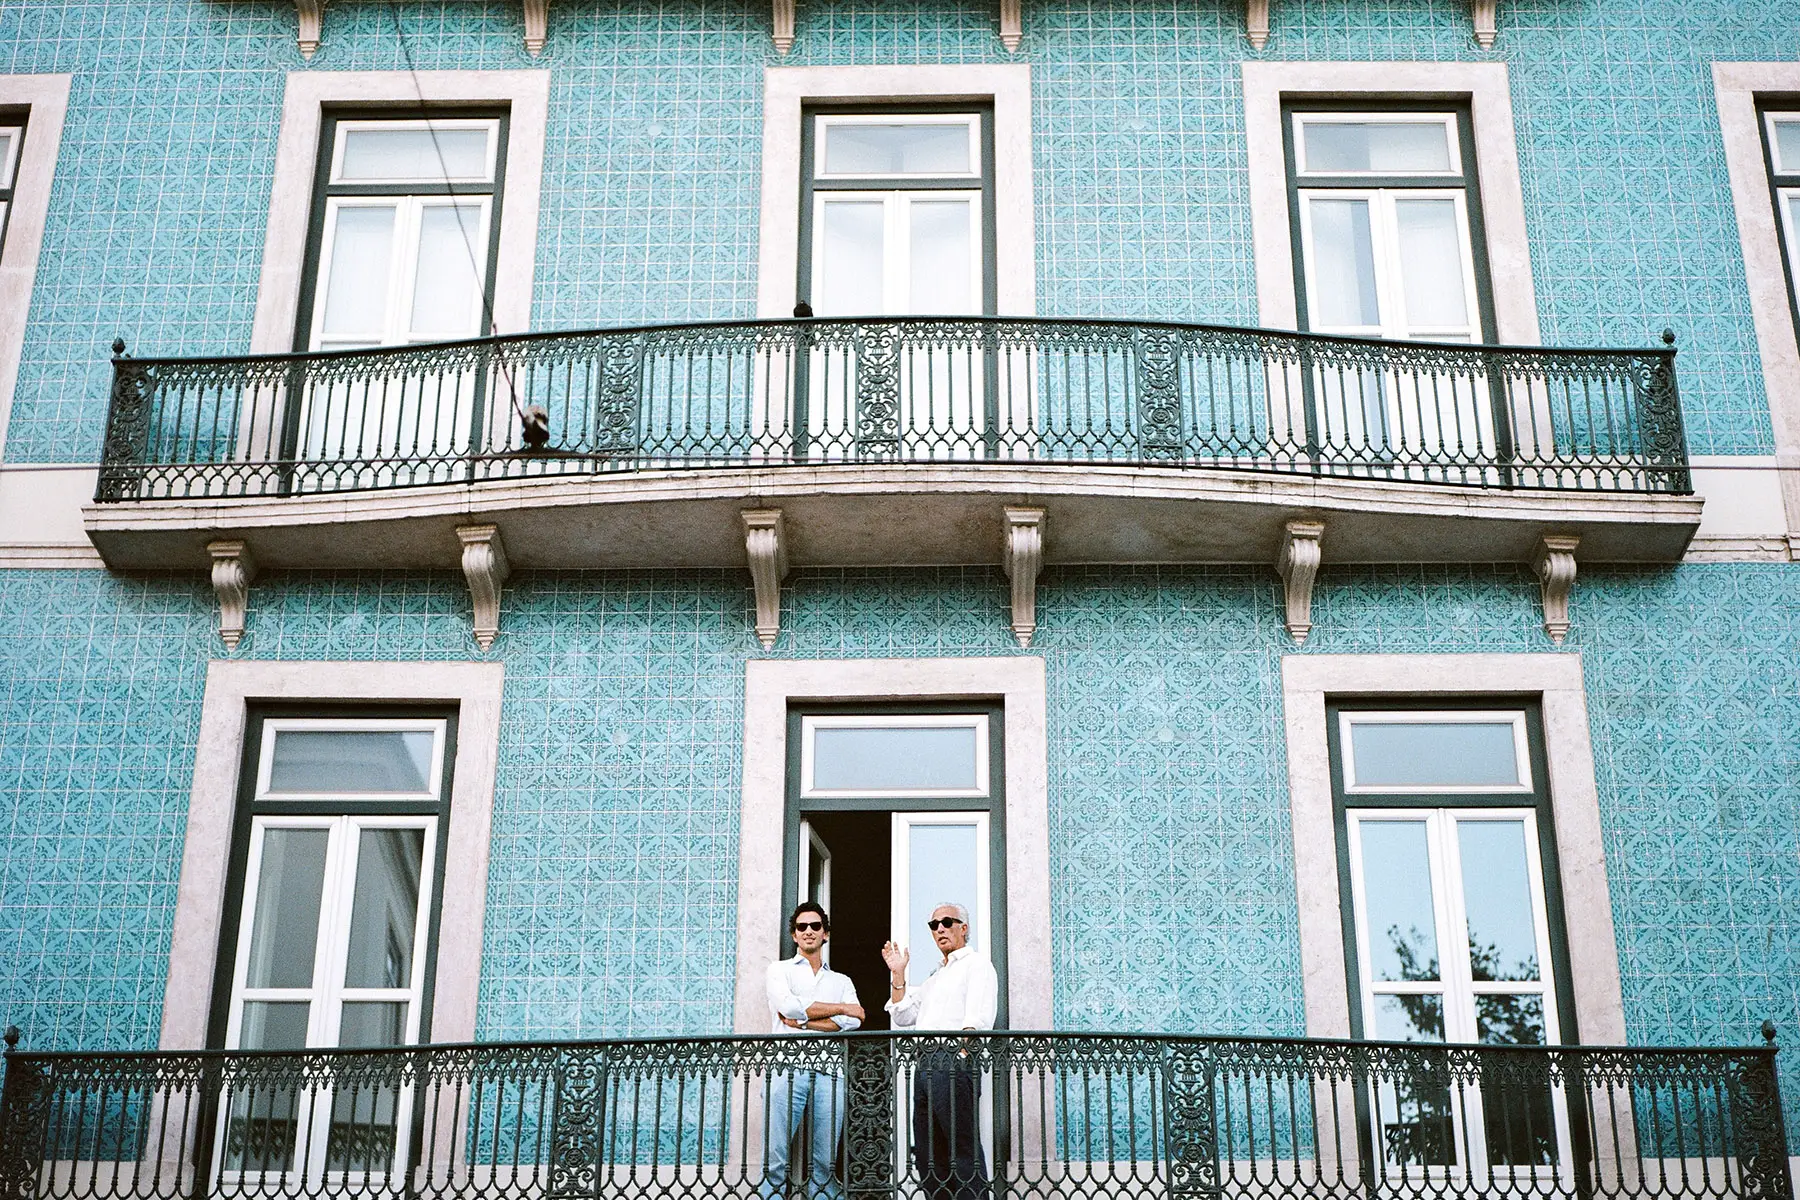 Two men standing on a balcony of a Portuguese house